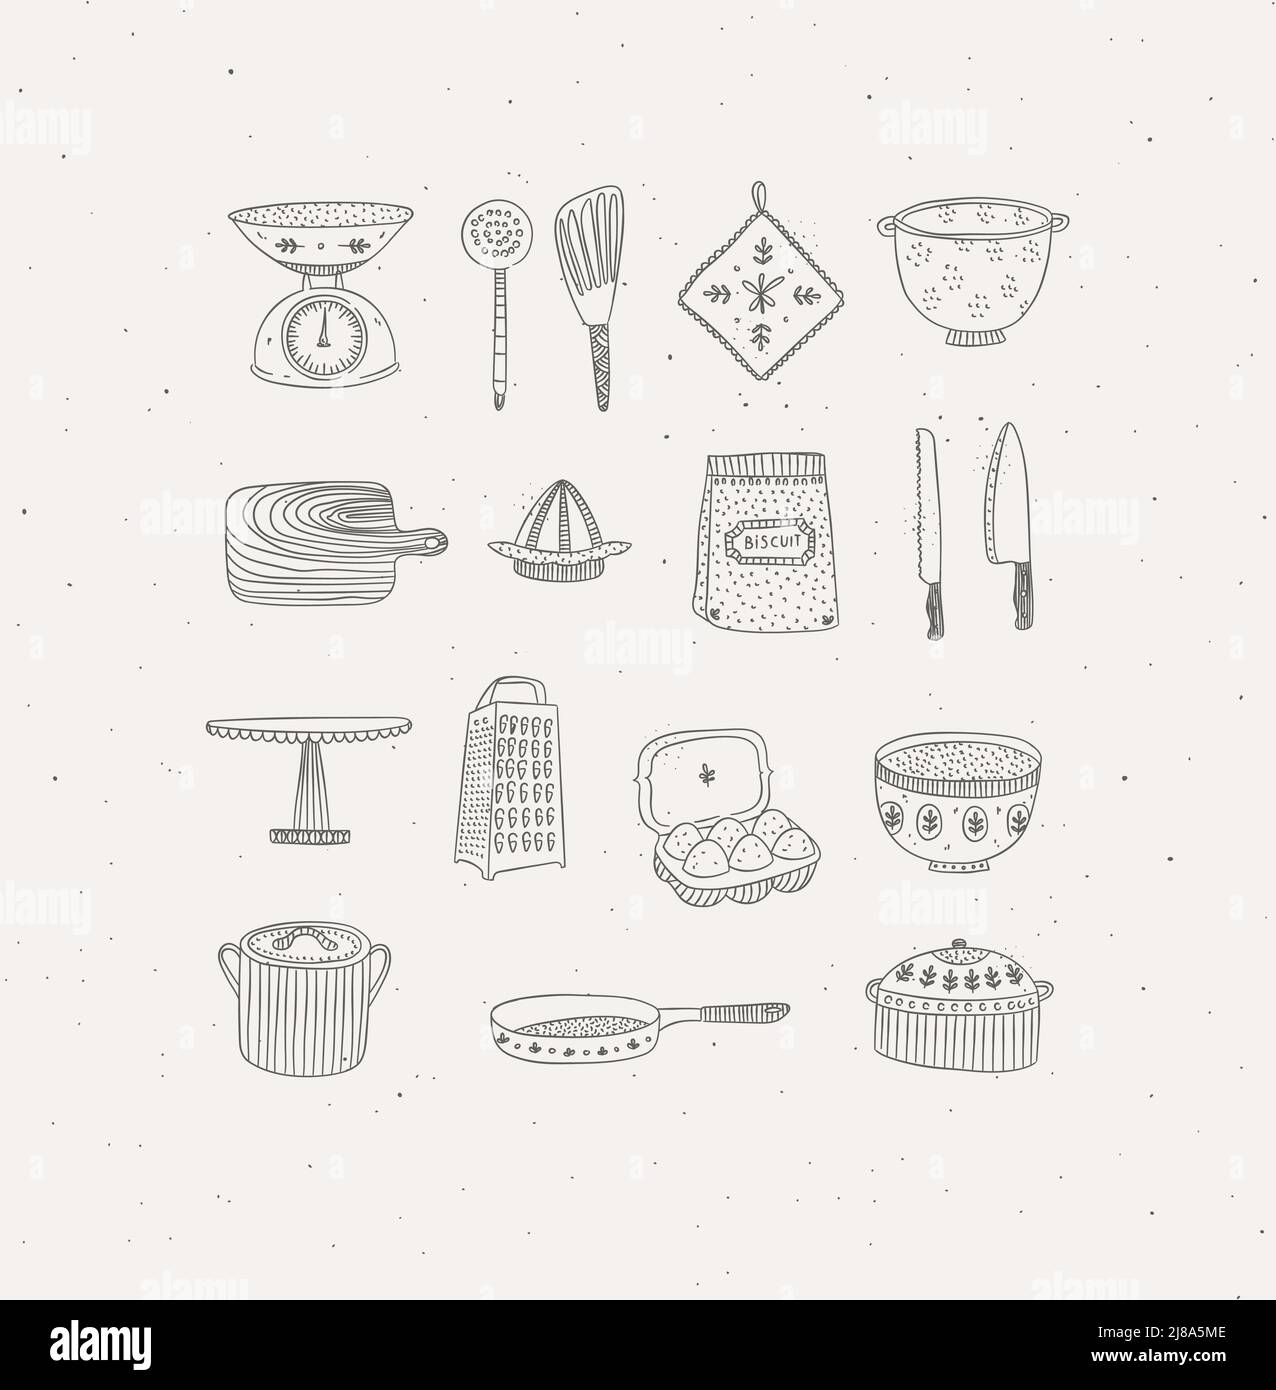 Set of kitchen tools and cooking icons drawing in handmade graphic primitive casual style on grey background. Stock Vector